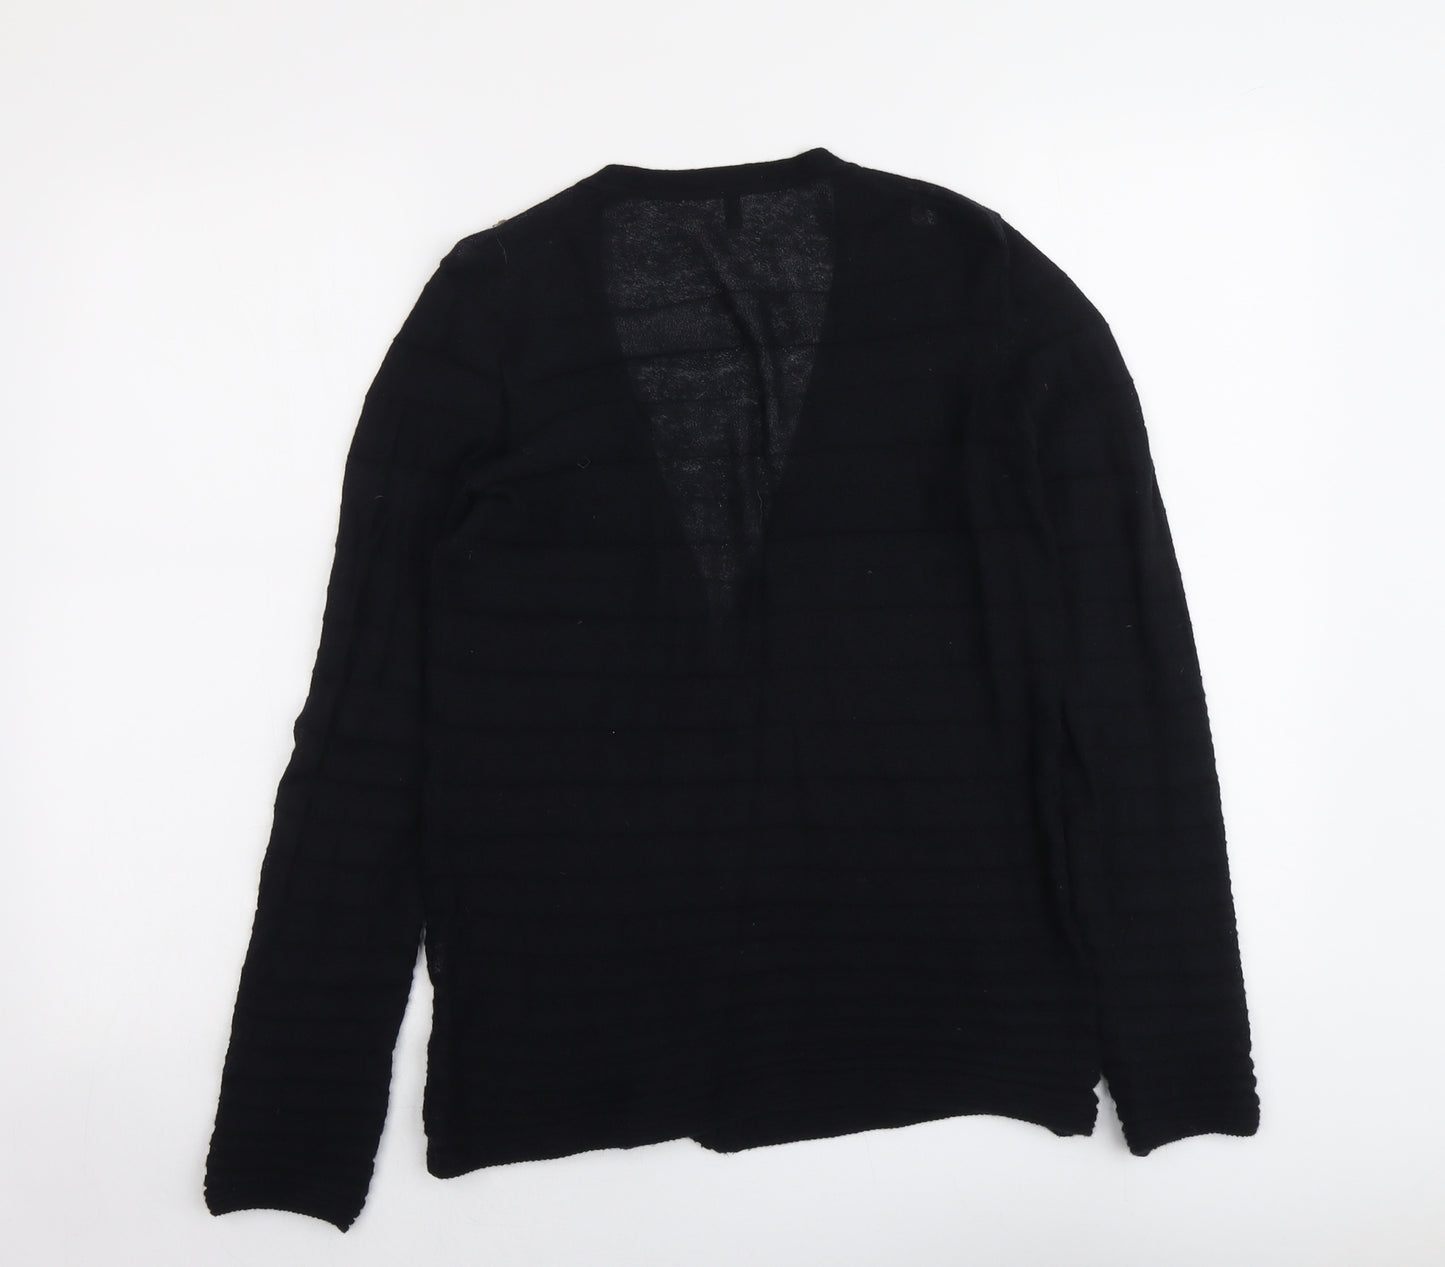 United Colors of Benetton Womens Black V-Neck Acrylic Cardigan Jumper Size S